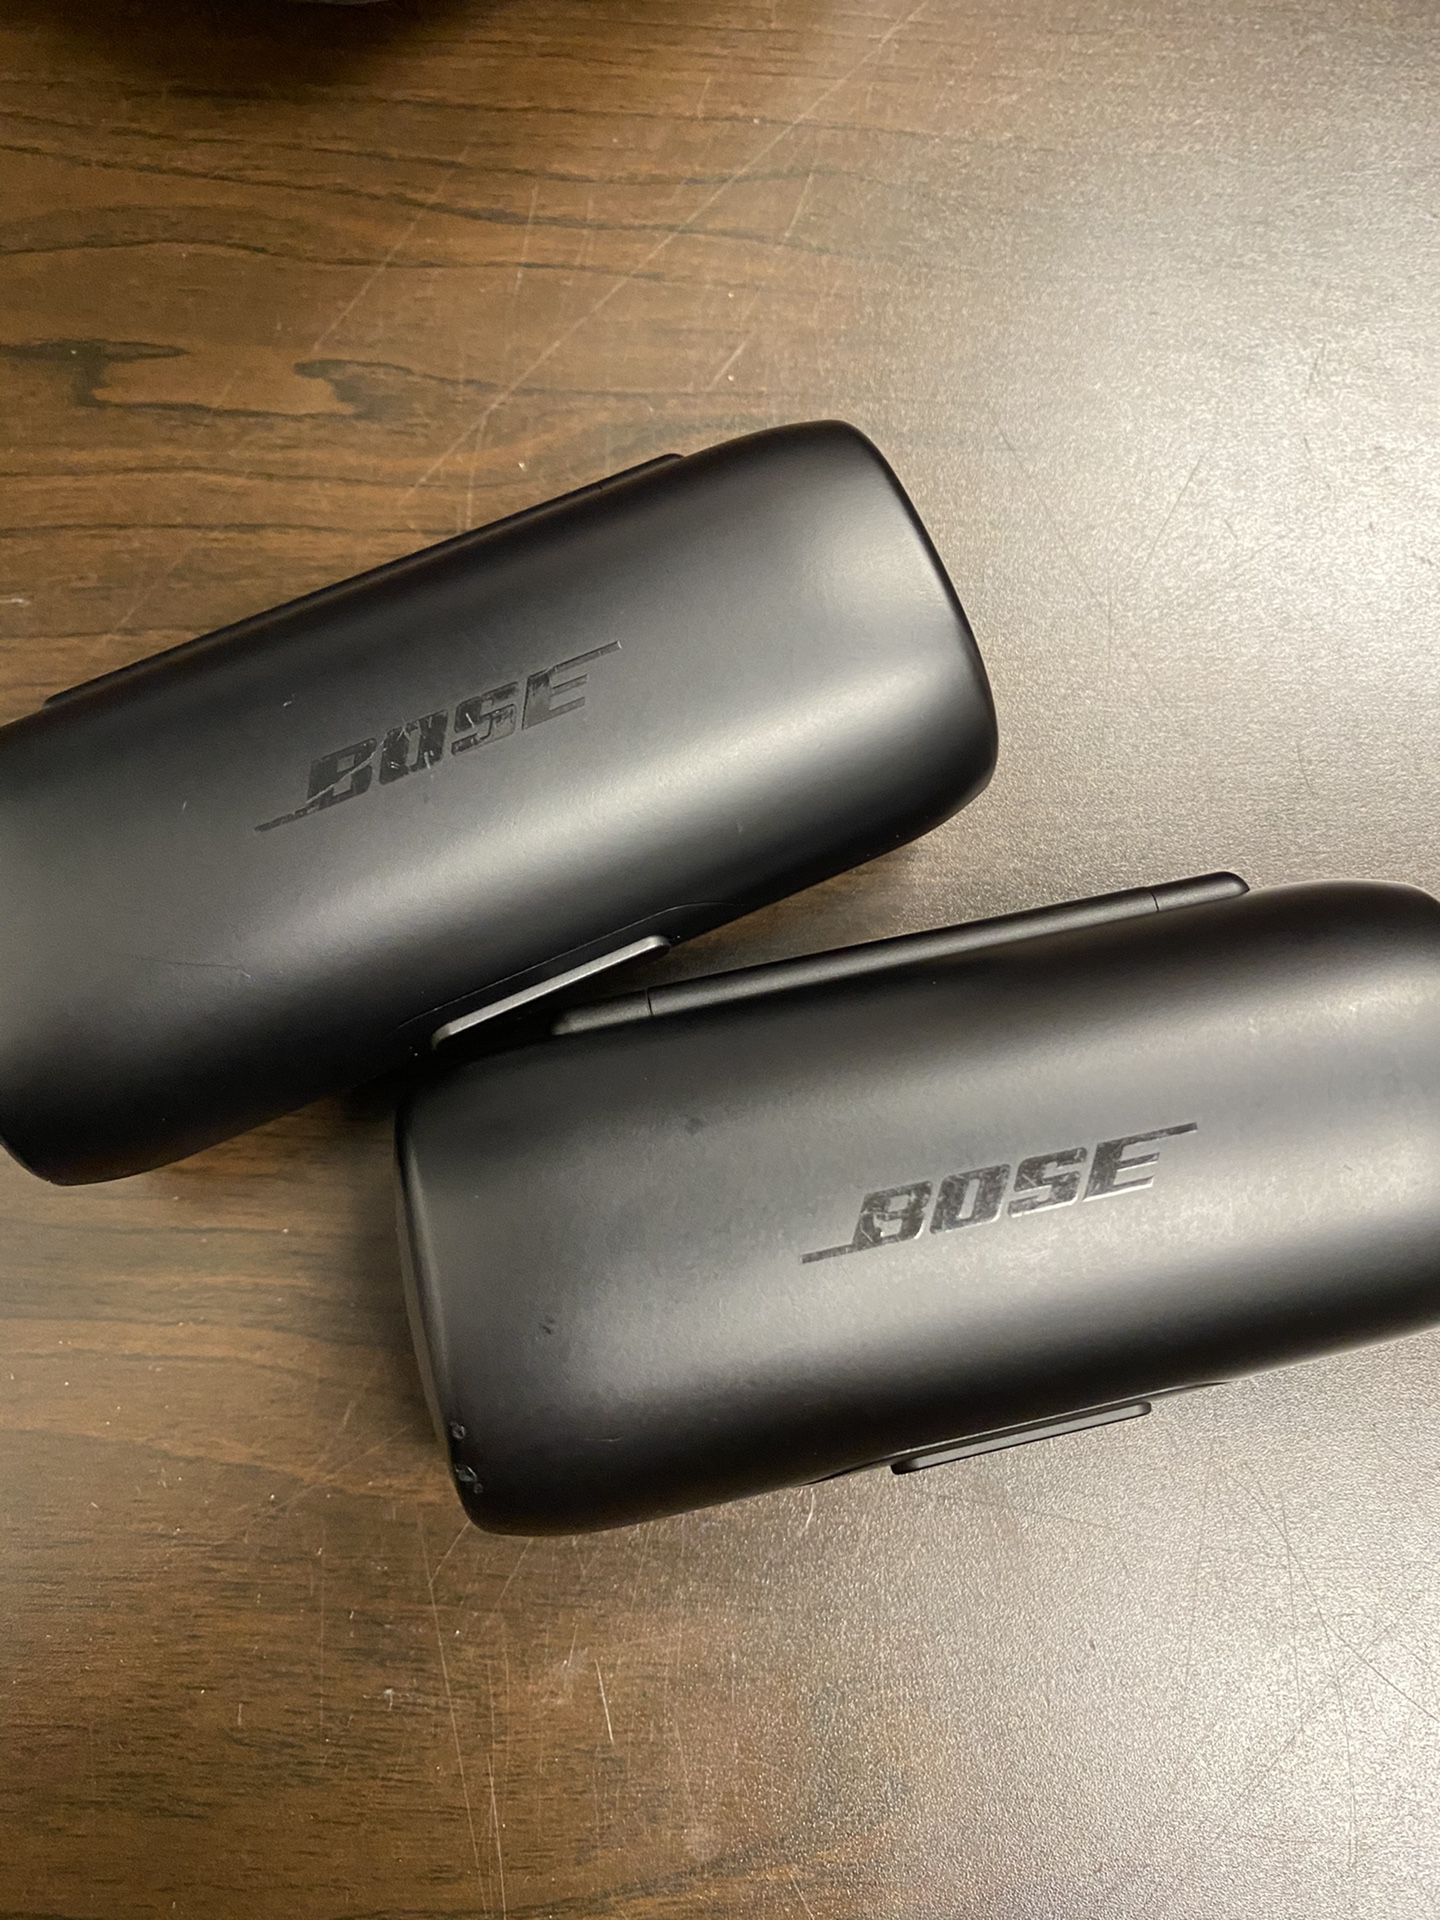 Bose soundsport wireless earbuds and extra charging case